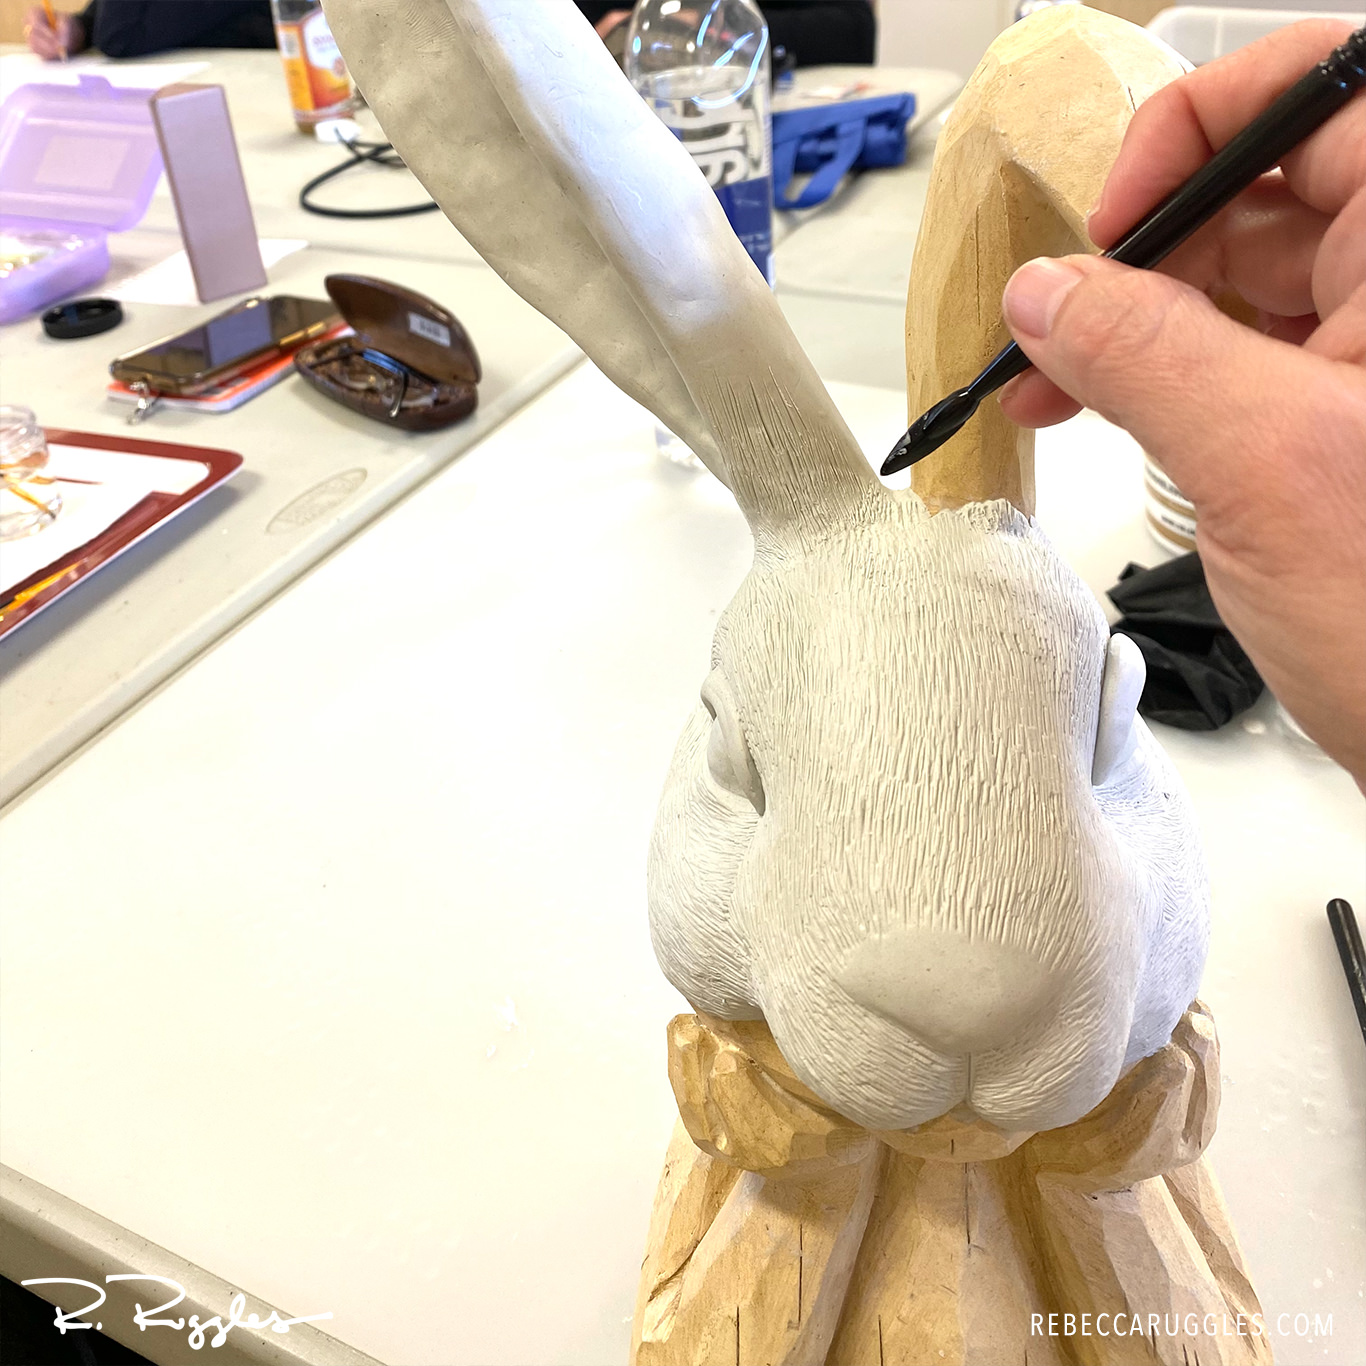 Applying and sculpting Apoxie Sculpt to the bunny statue at art group